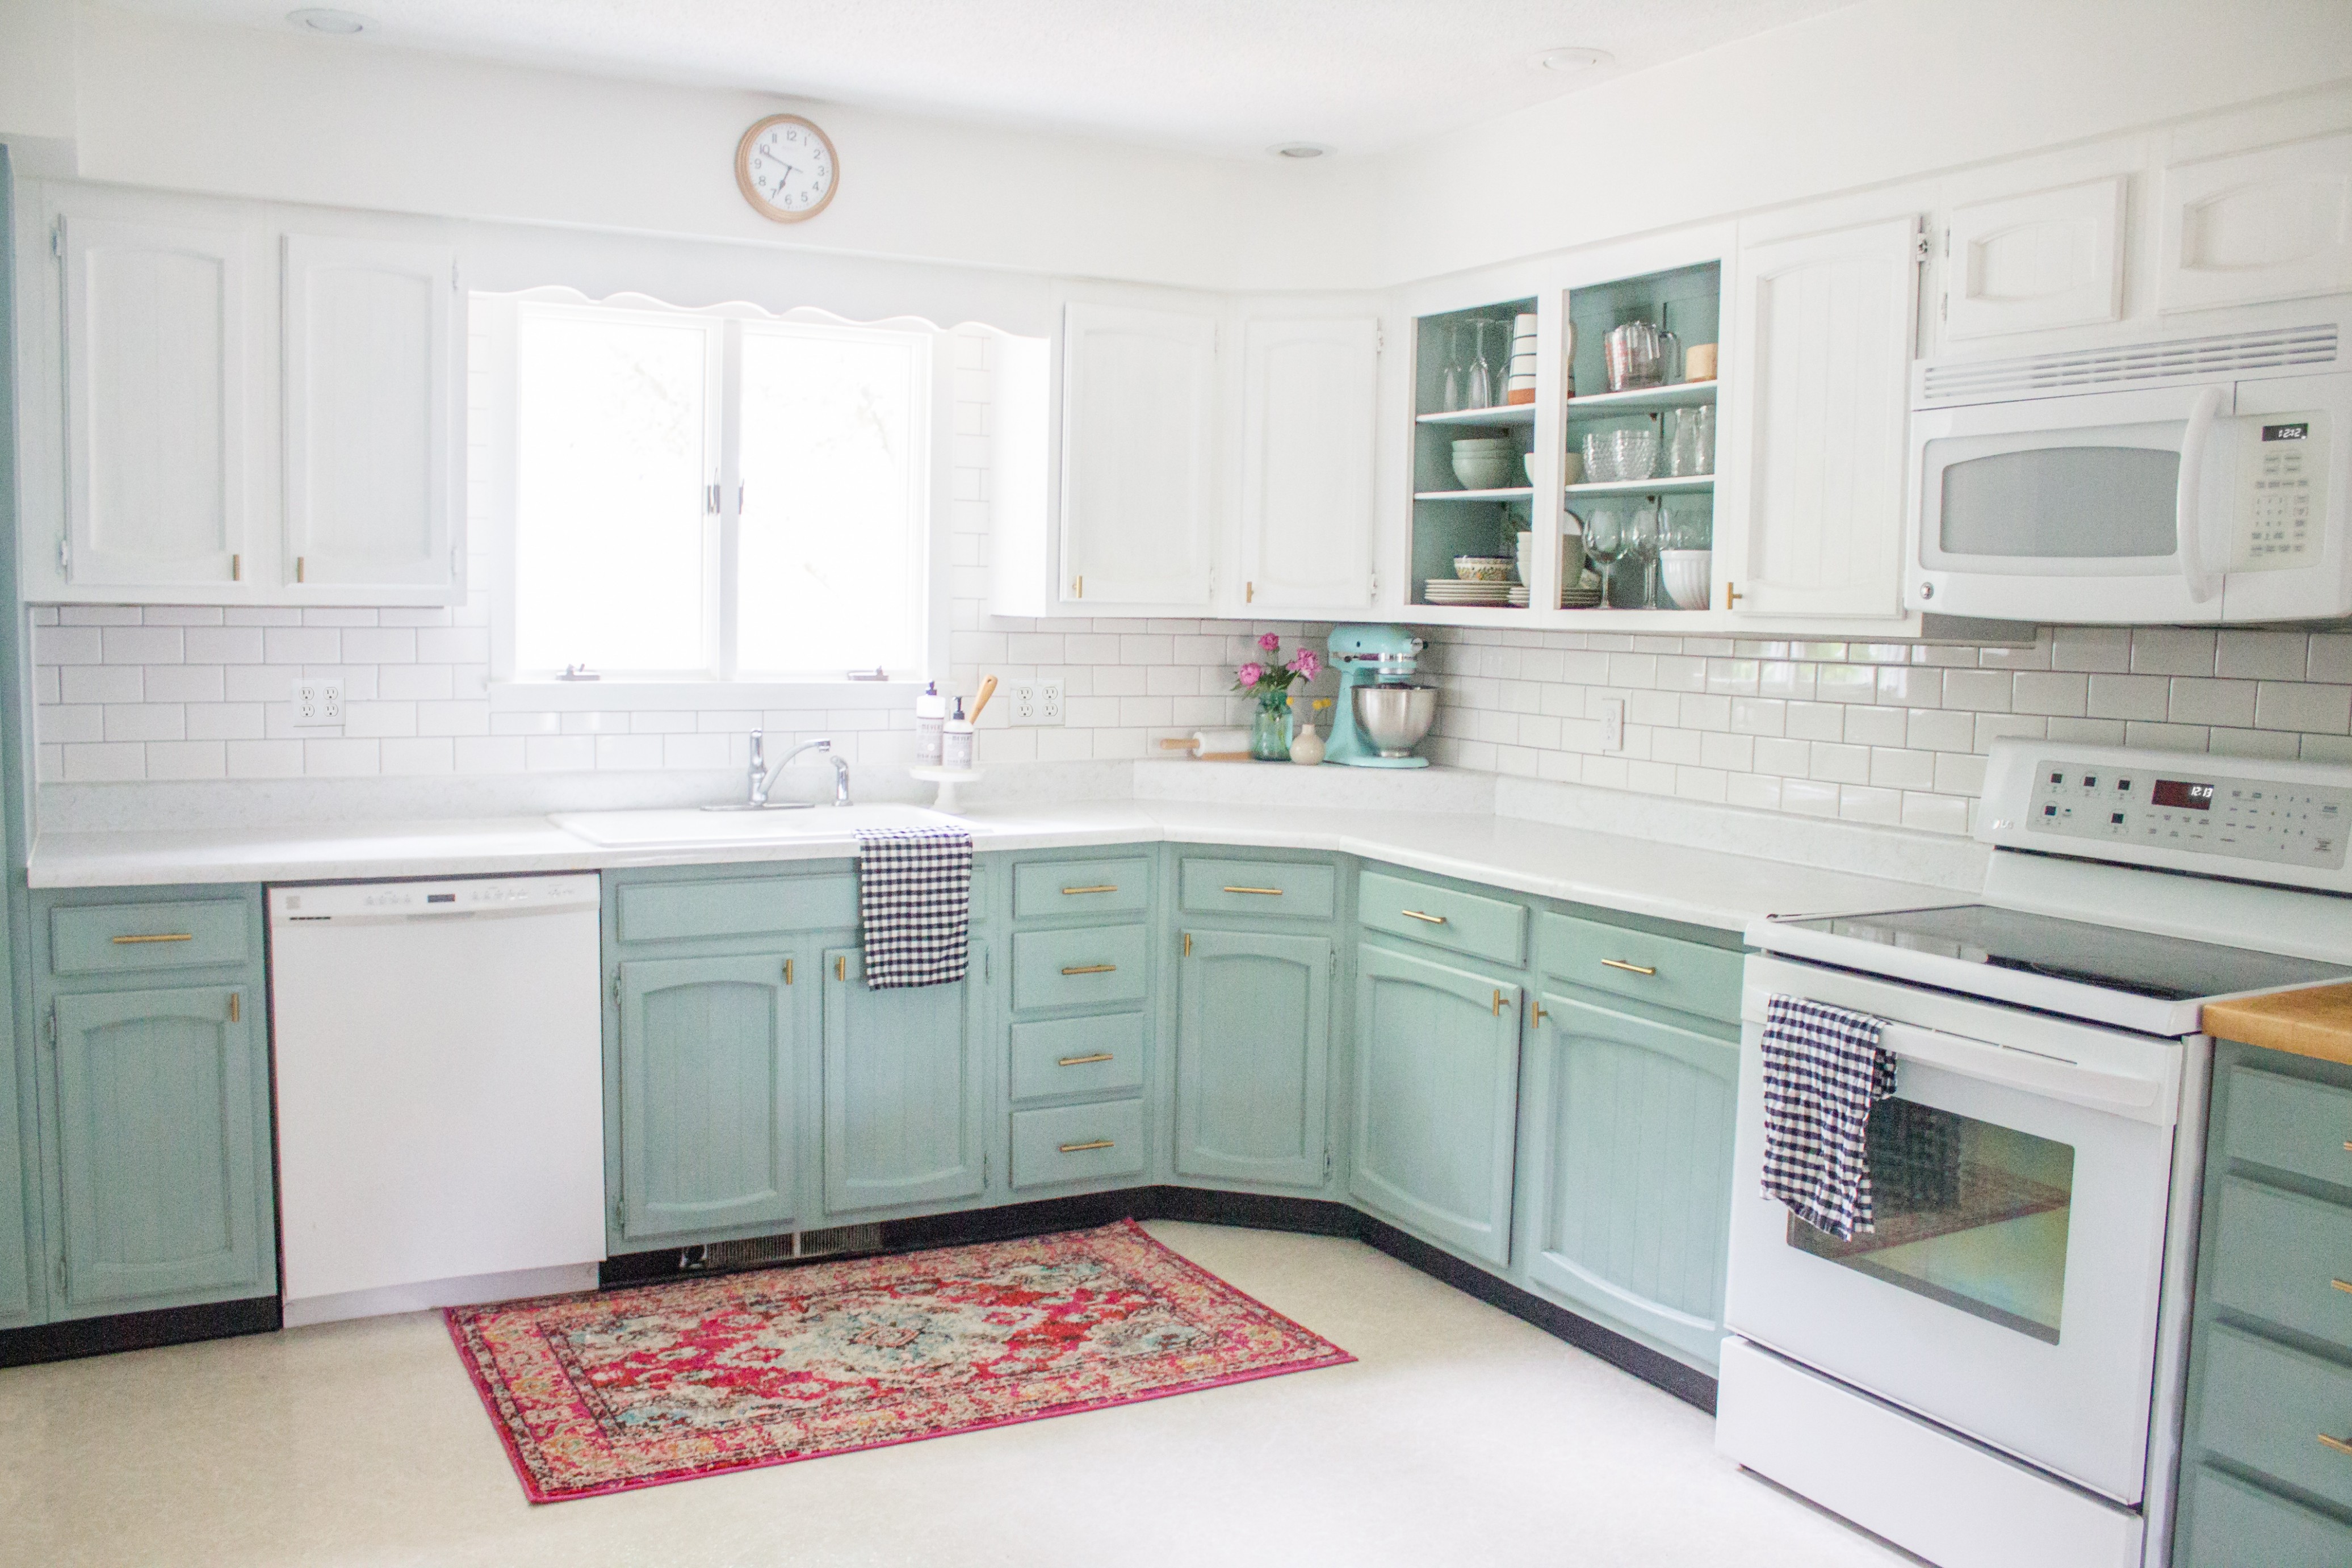 Chalk Painted Kitchen Cabinets Two Years Later | Holland Avenue Home Annie Sloan Chalk Paint Ideas For Kitchen Cabinets